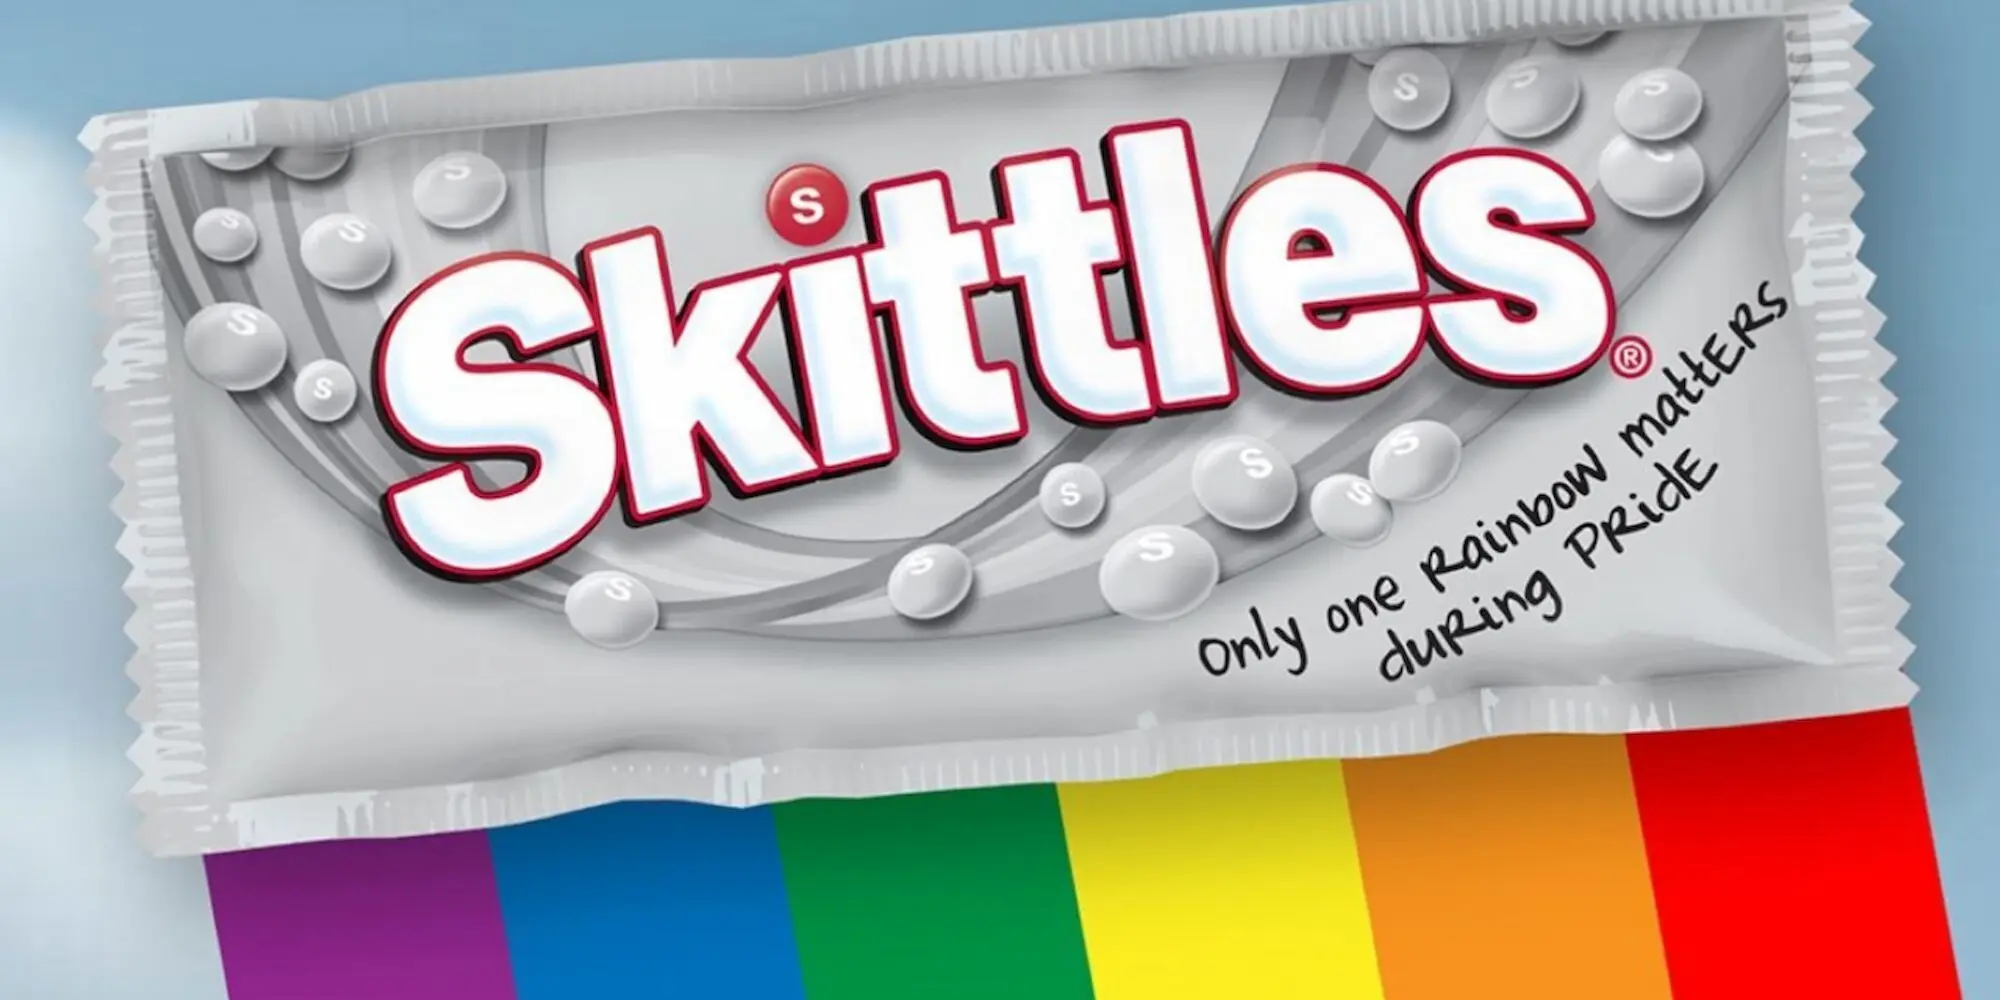 Image of Skittles pride campaign